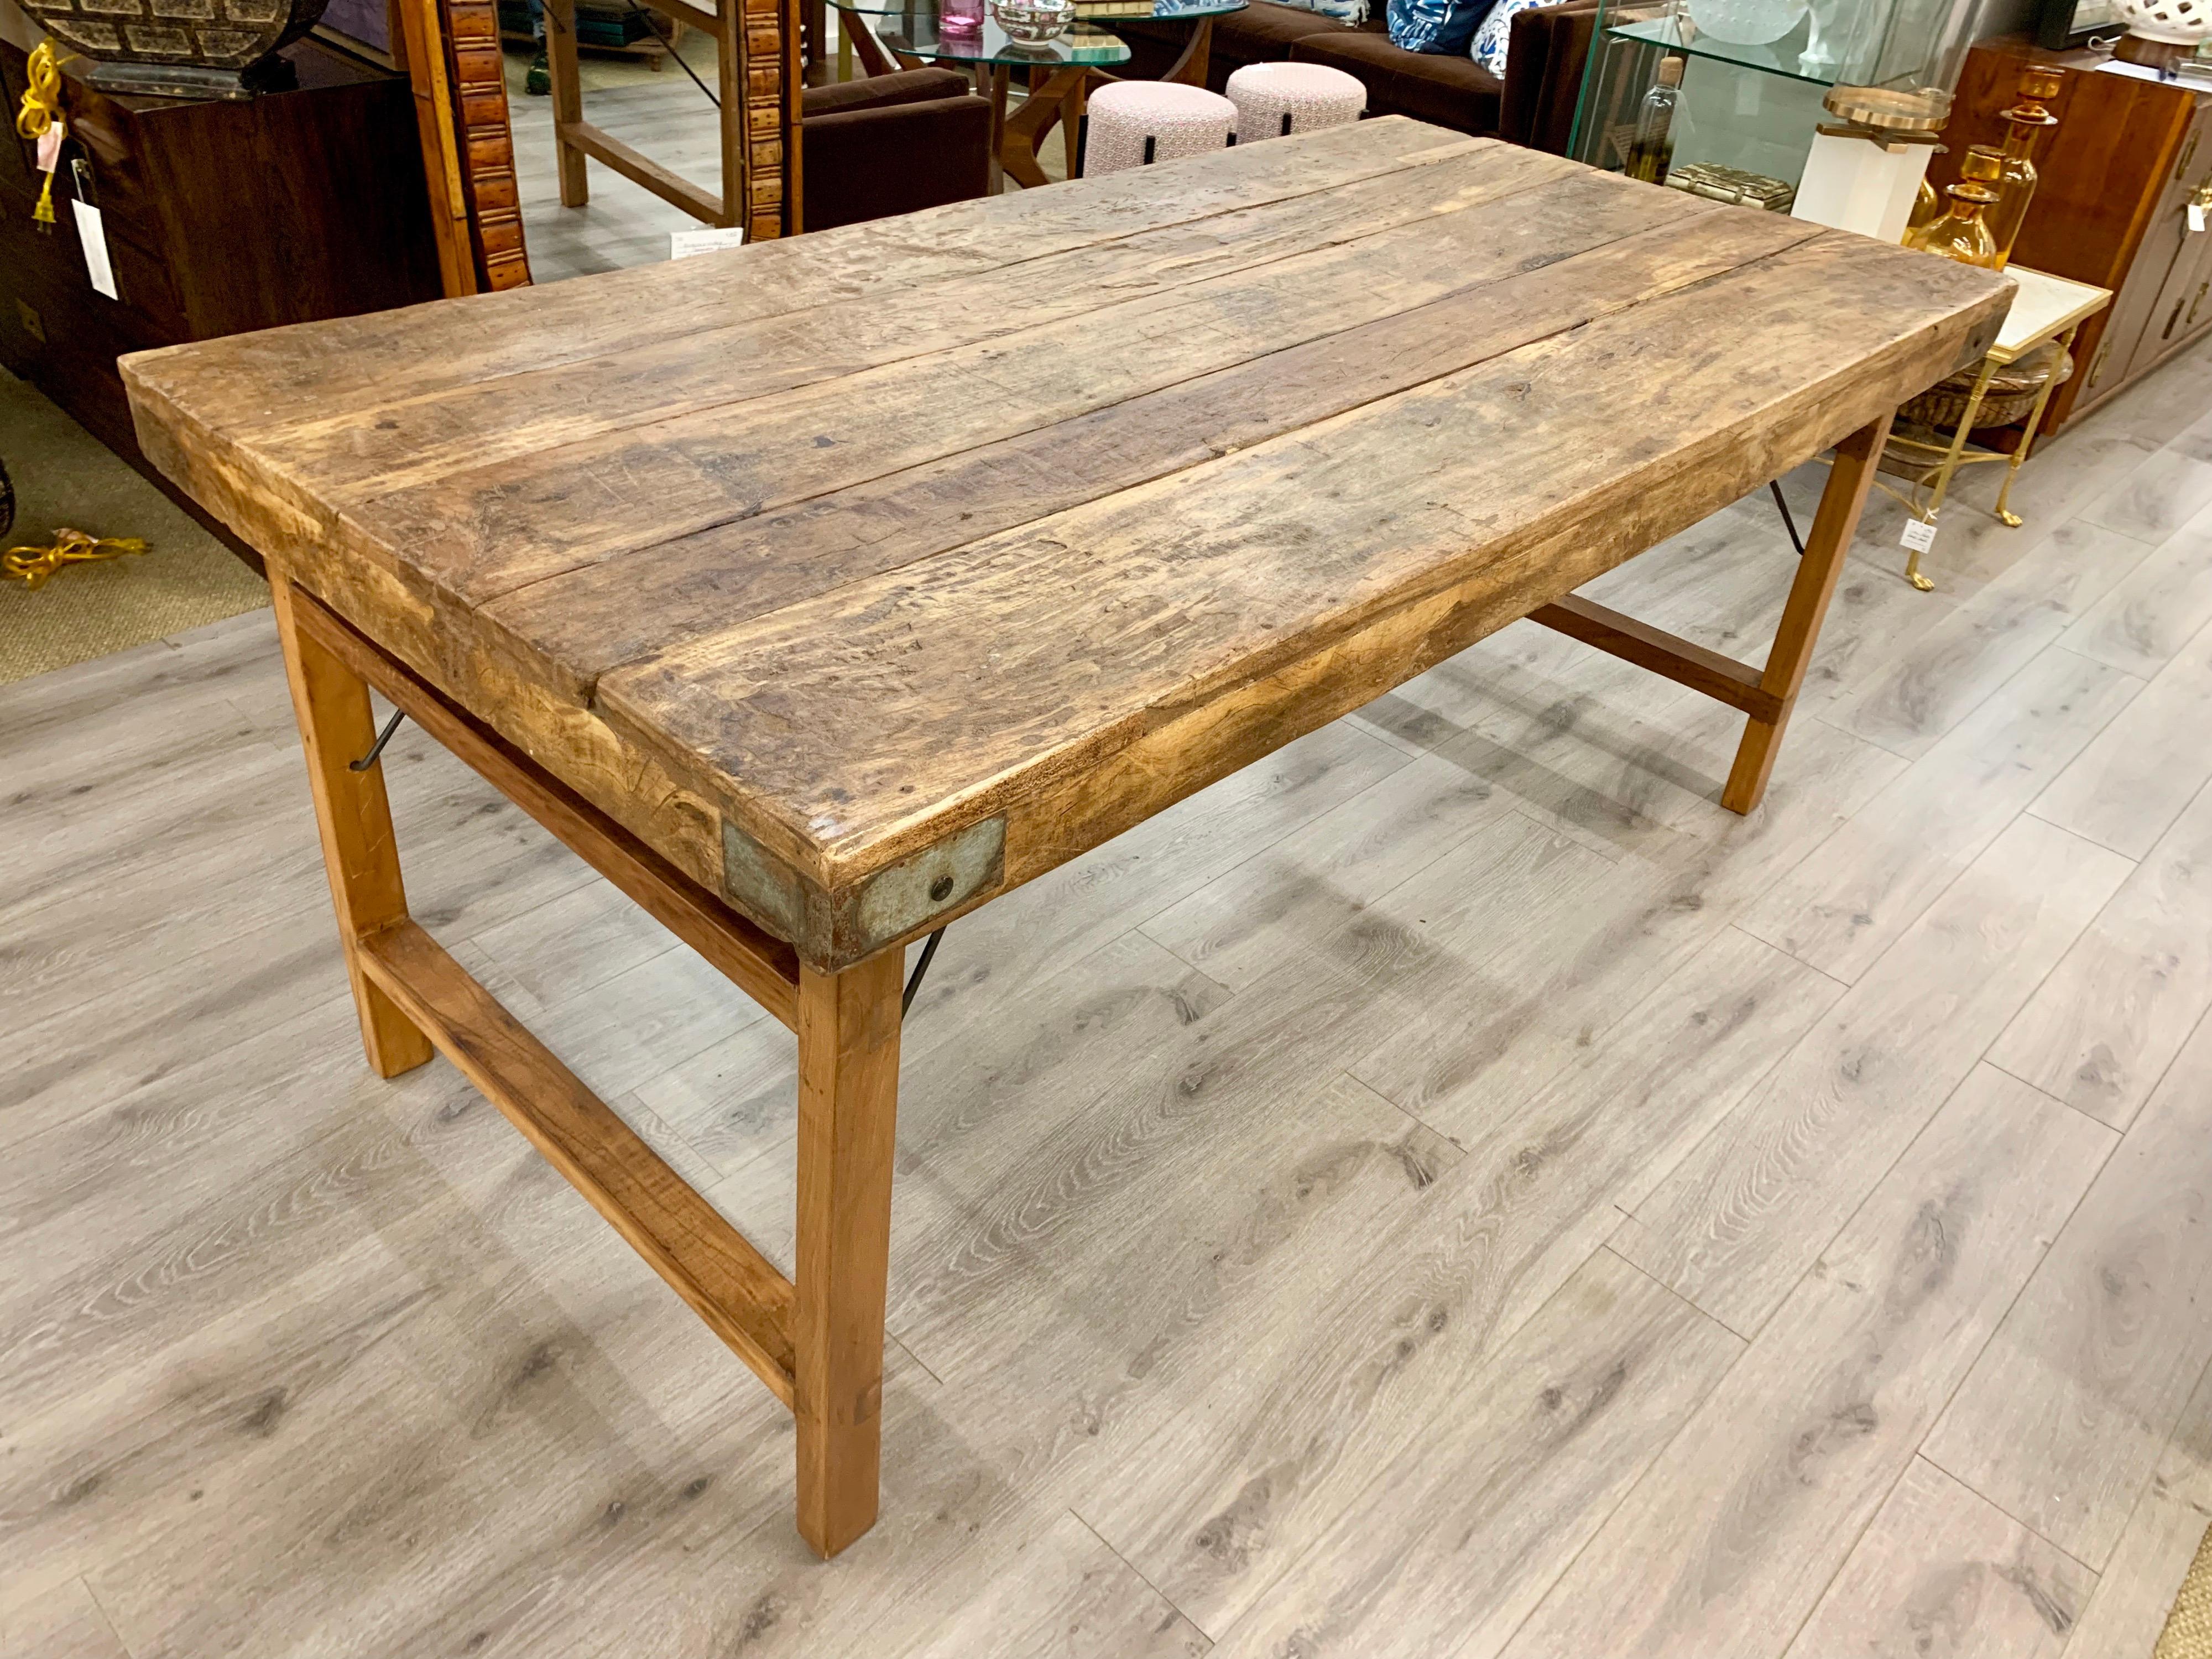 Great for a kitchen or dining room, depending on decor of course. This US made vintage 20th century waxed oak harvest table has great scale. Not too big or too small measuring just under six feet long.
  